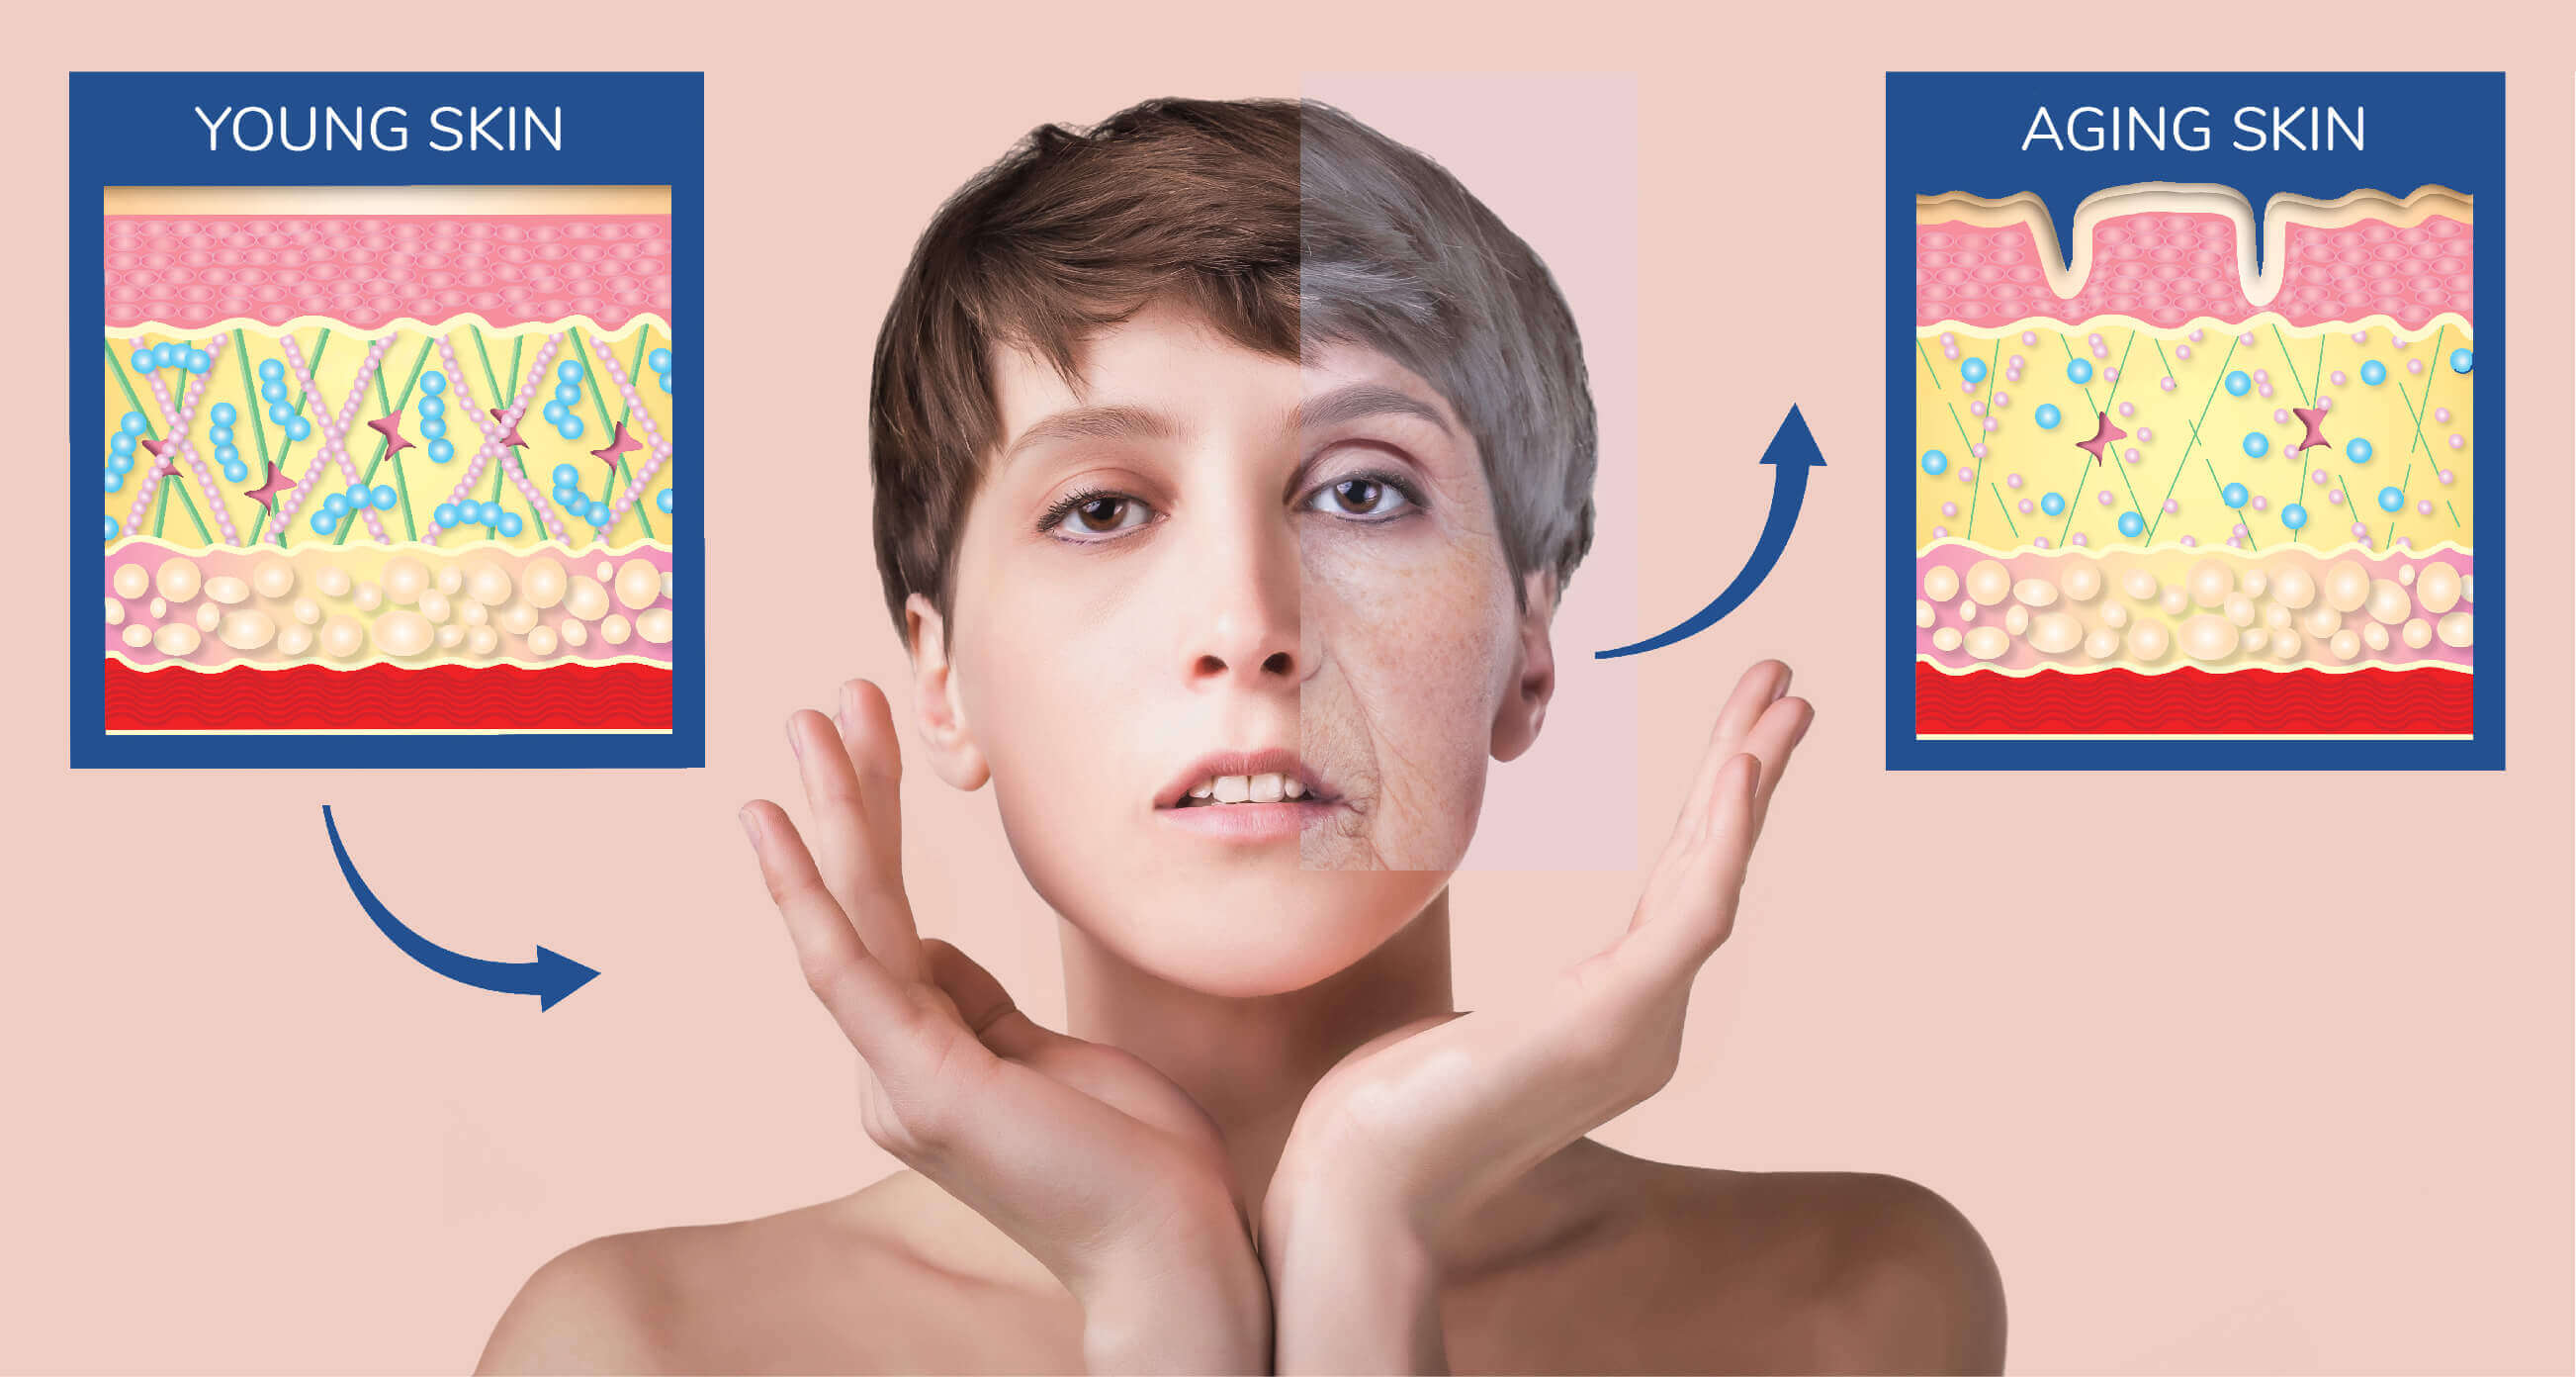 Illustration of young versus aging skin